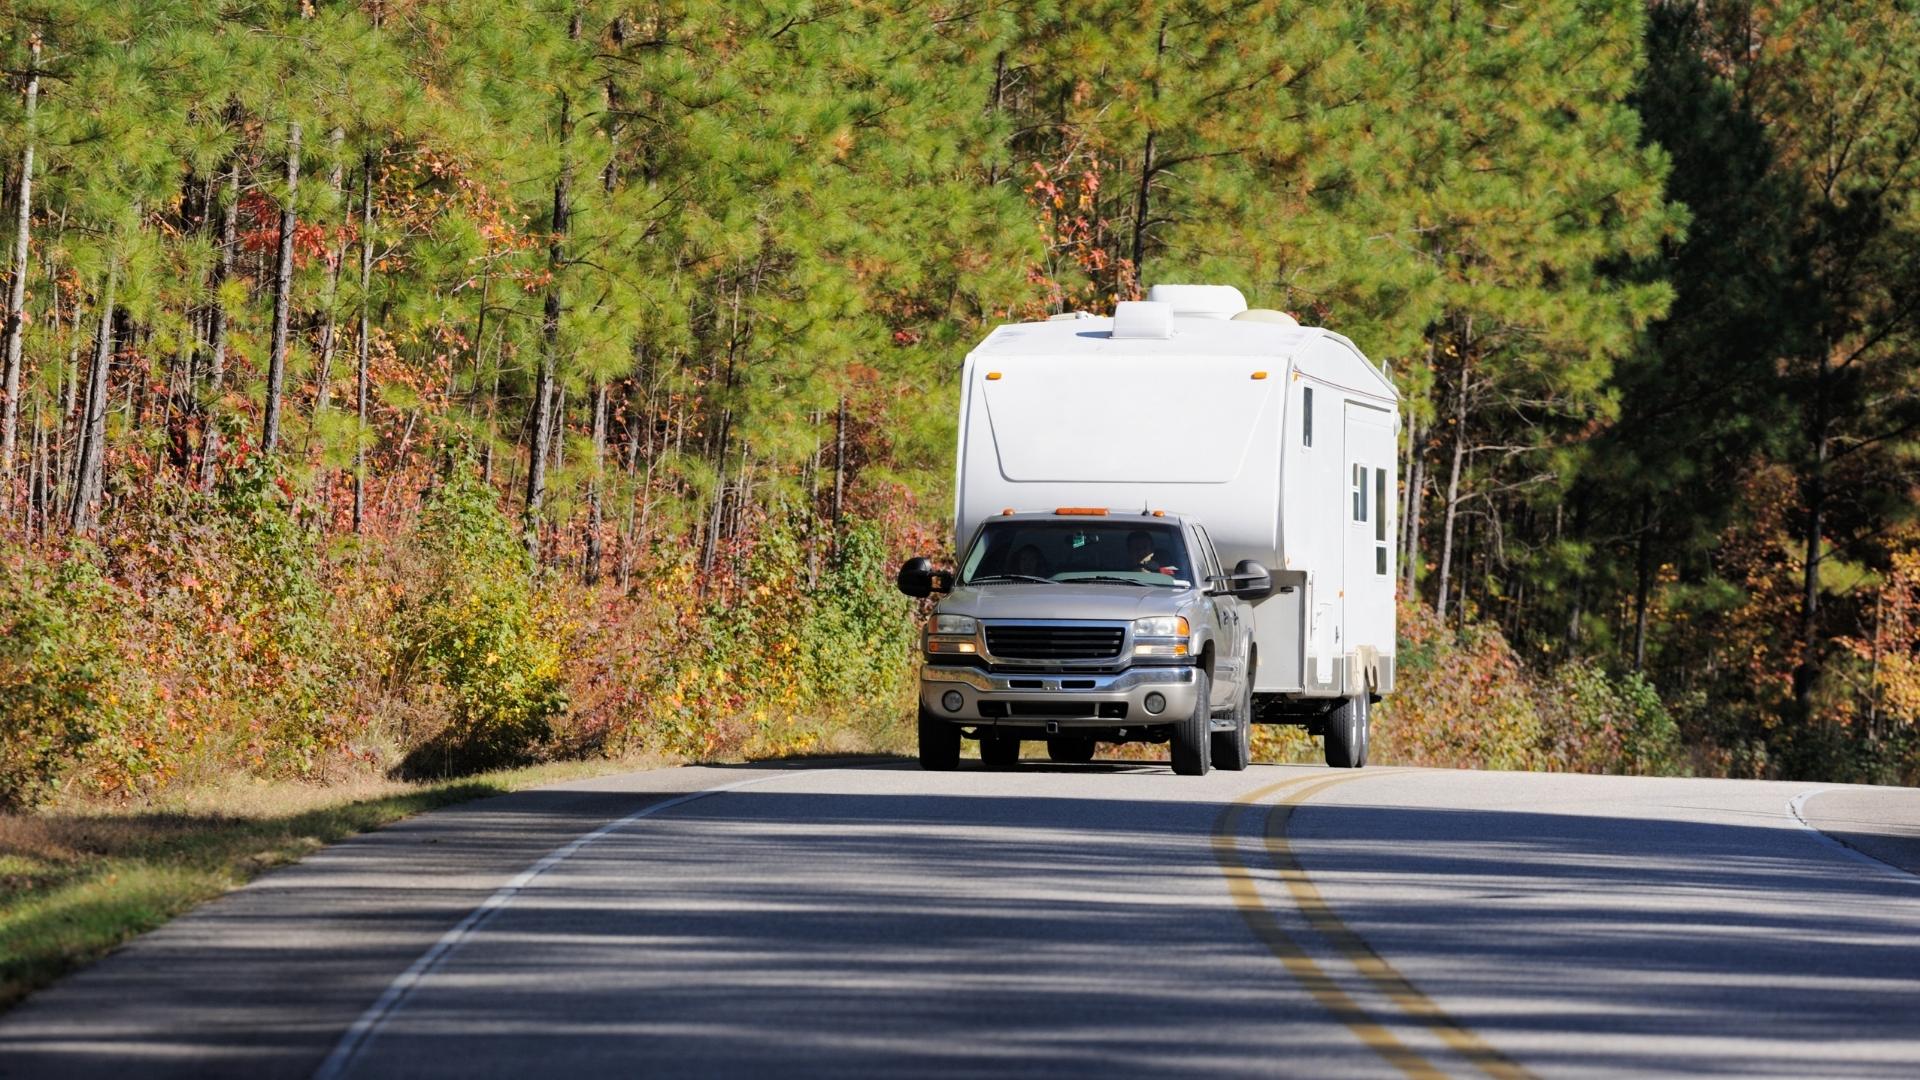 How Much Does It Cost To Transport An RV? - TheRVgeeks